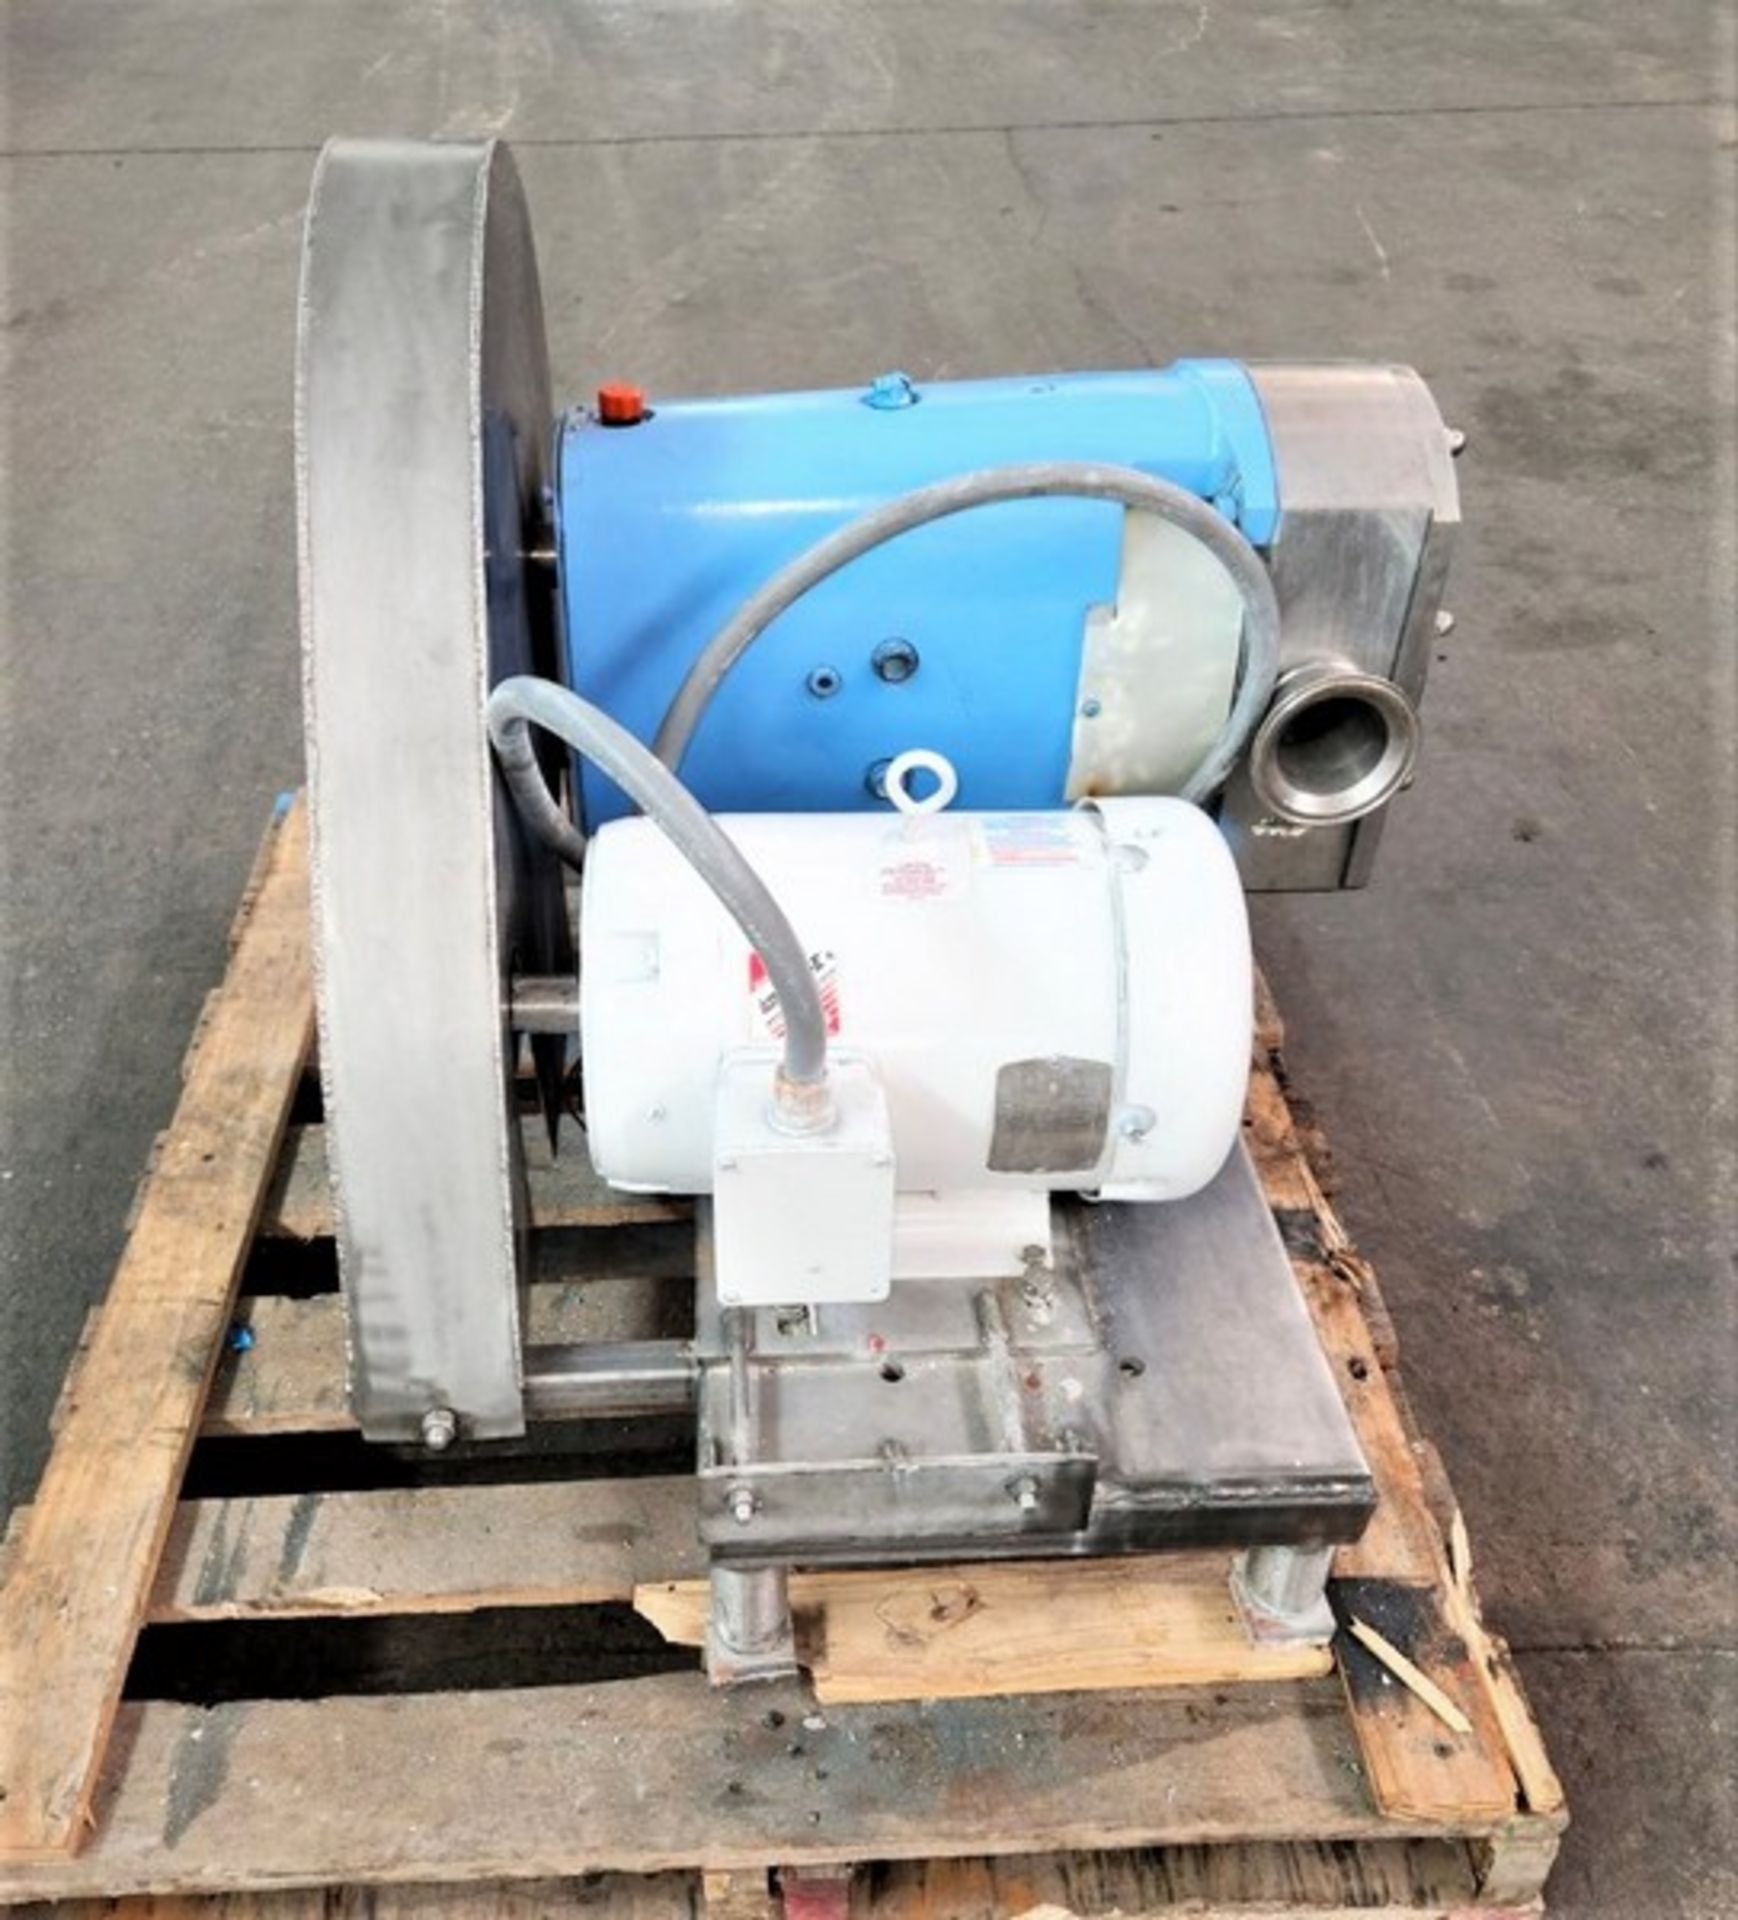 G H (Alfa Laval) 7.5 hp 4" S/S Sanitary Positive Displacement Pump, Model 822, S/N 95-8-50174 with - Image 2 of 15